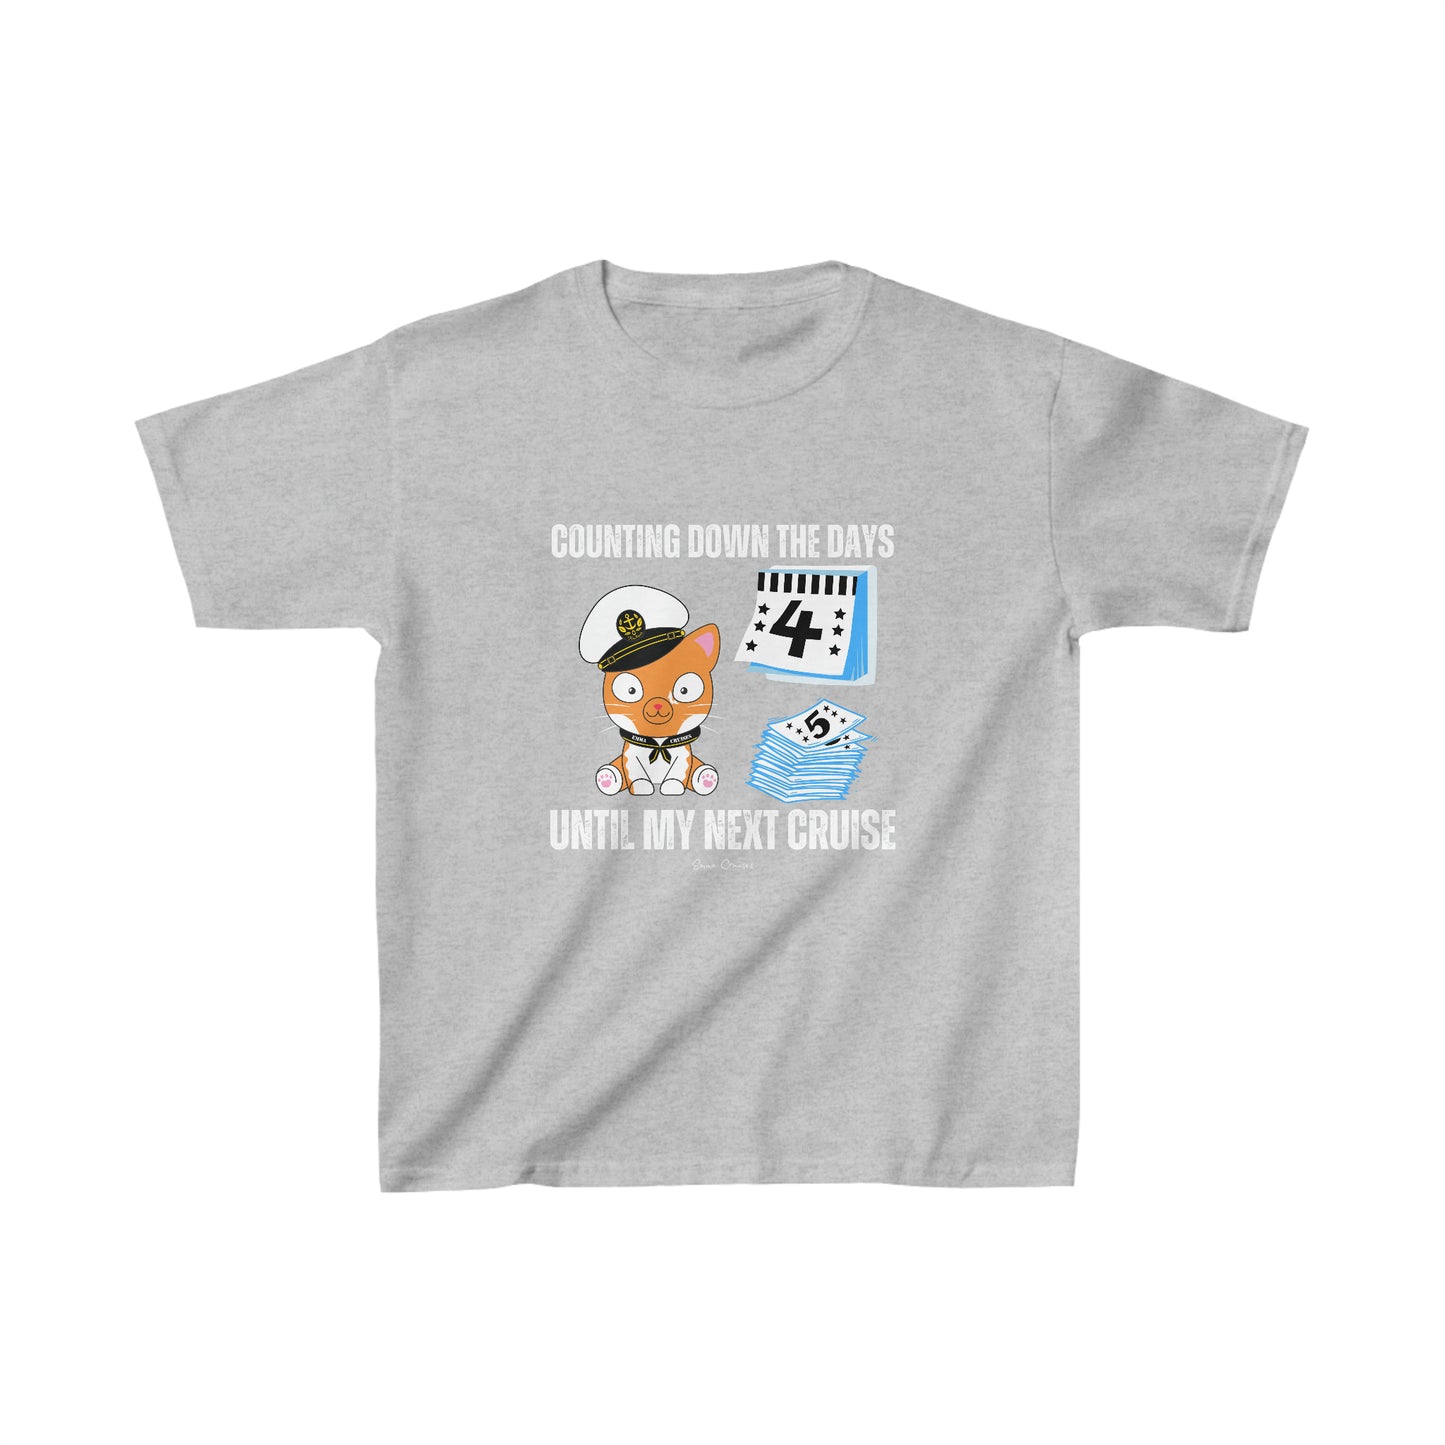 Counting Down the Days - Kids UNISEX T-Shirt